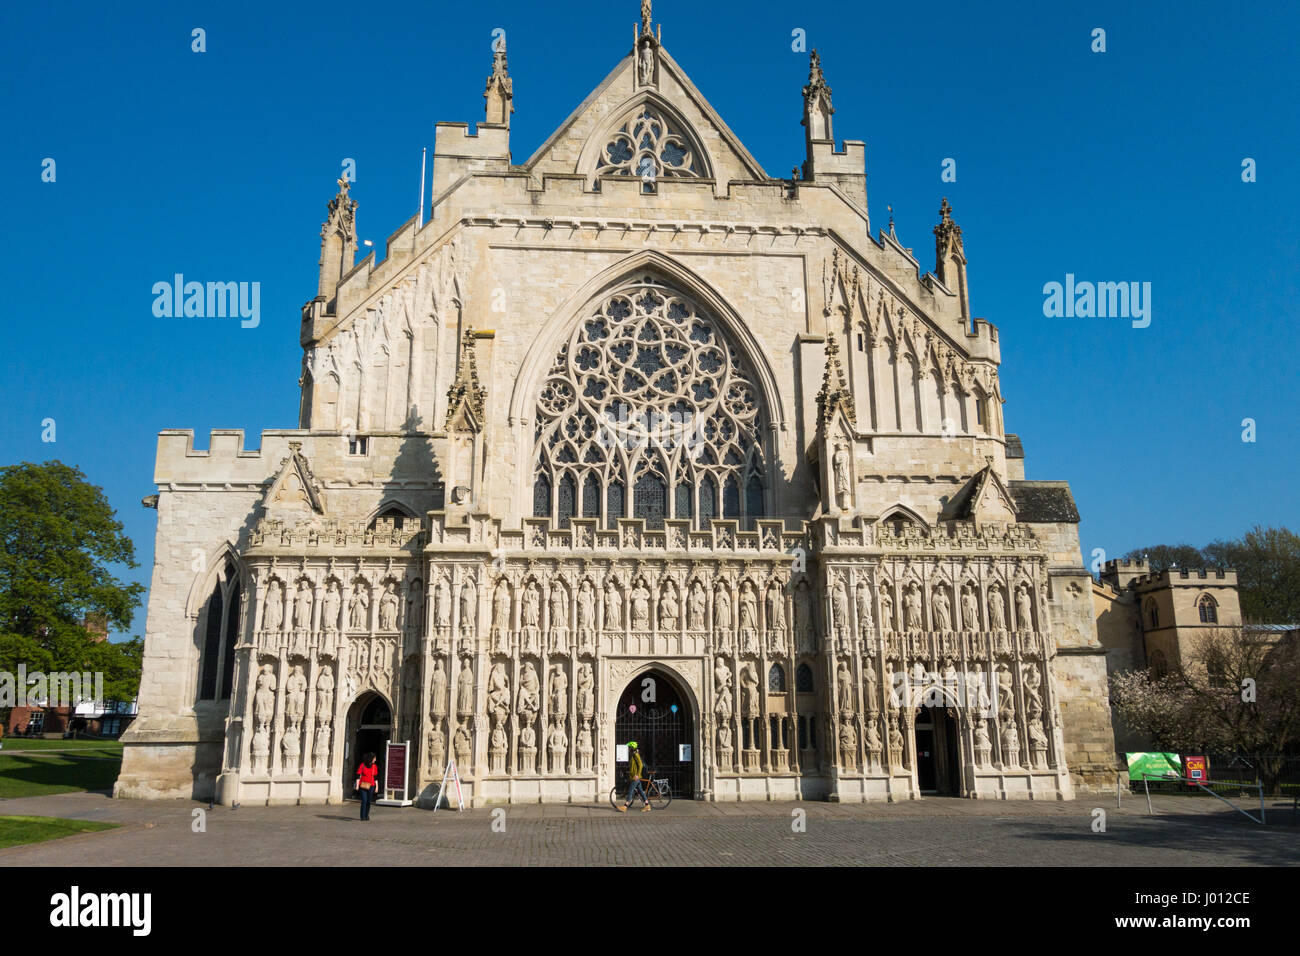 The exterior facade of Exeter Cathedral, Devon, UK. Stock Photo